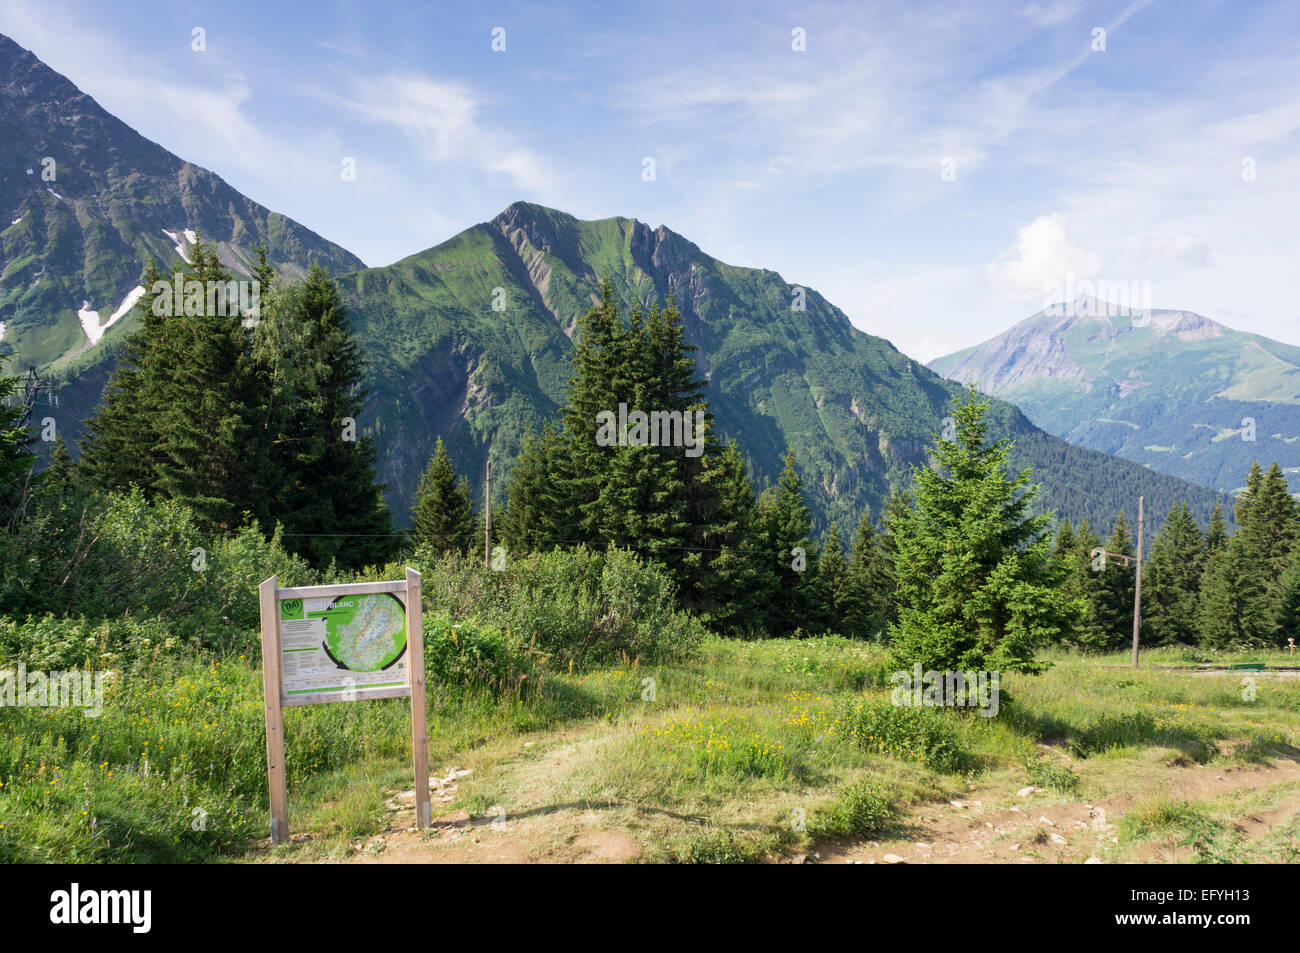 Walkers sign post on the Bellevue plateau above the Chamonix Valley, French Alps, France, Europe Stock Photo